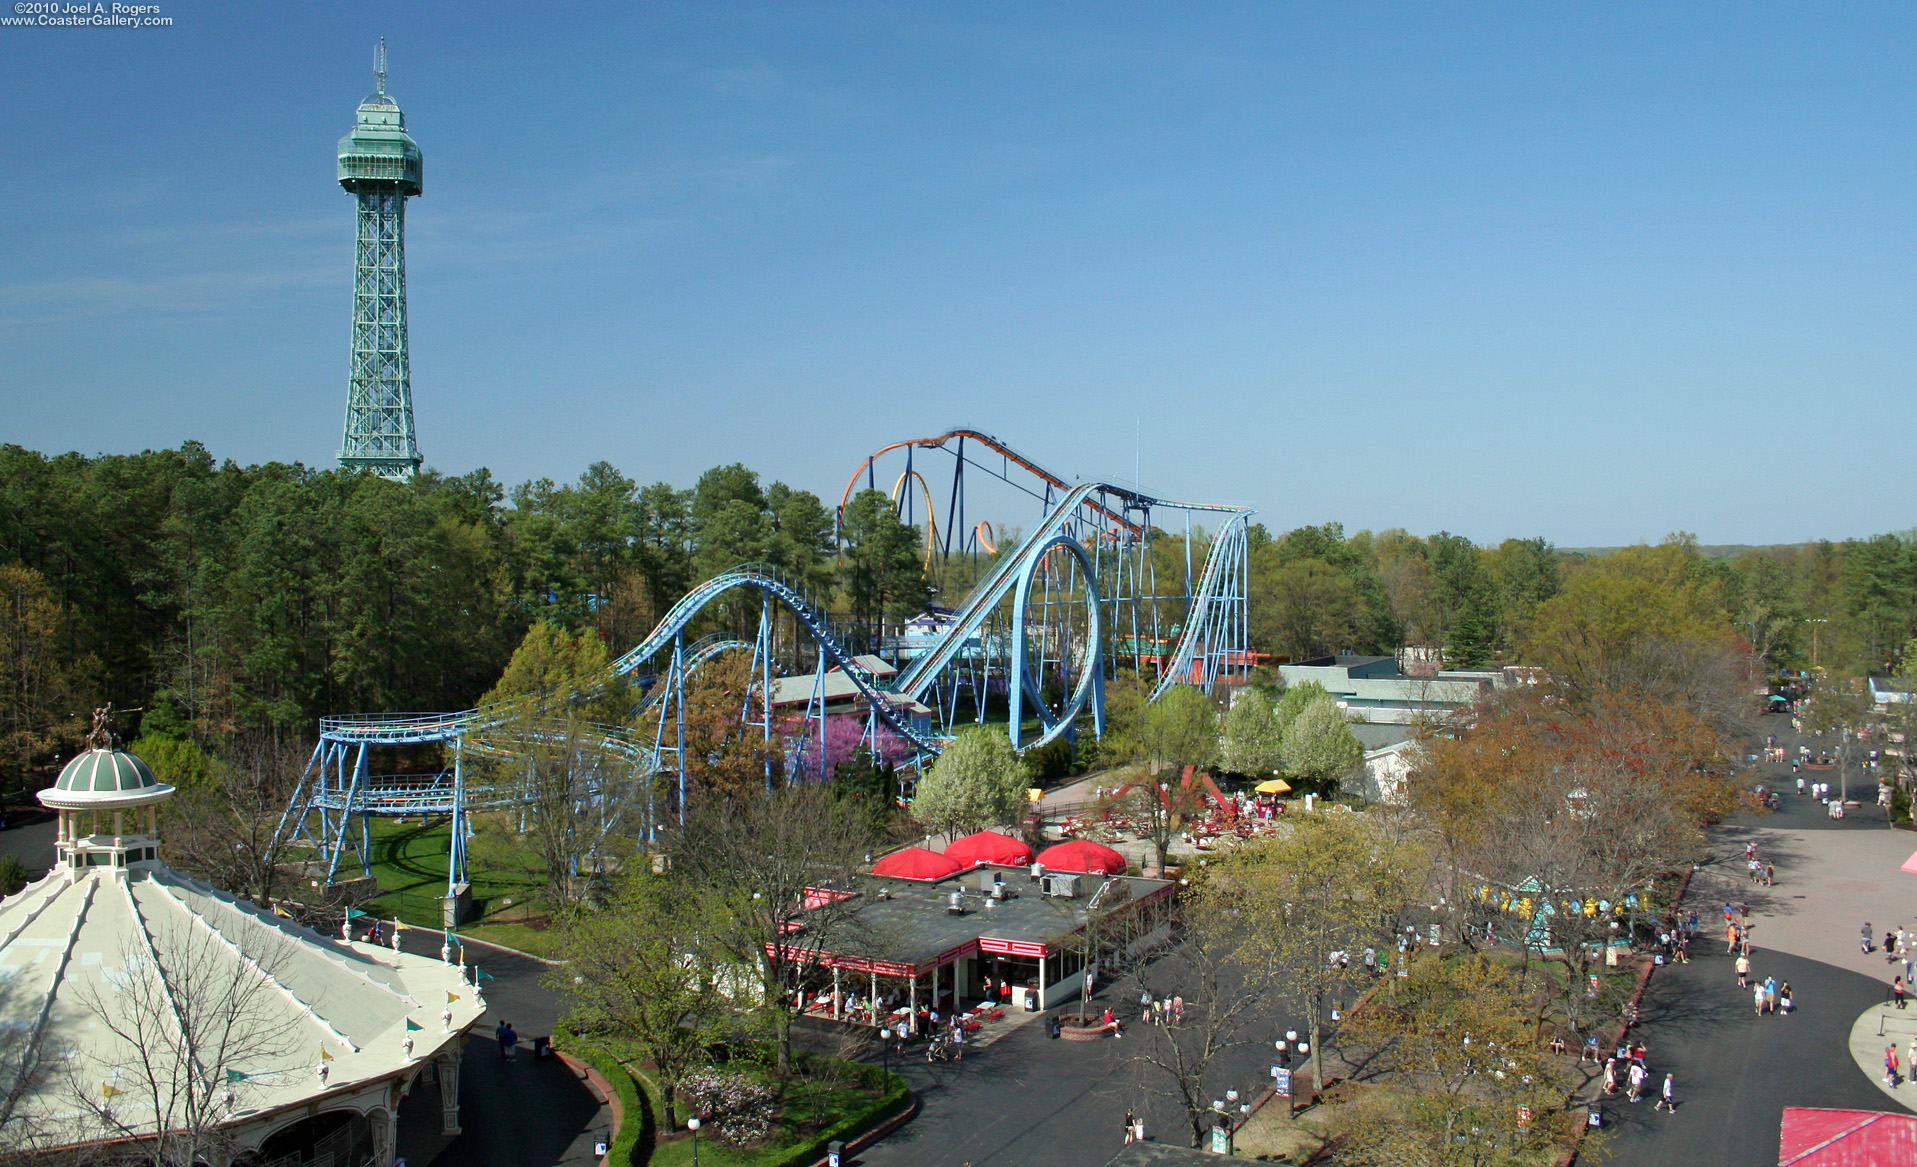 Aerial view of the Shockwave roller coaster at Kings Dominion